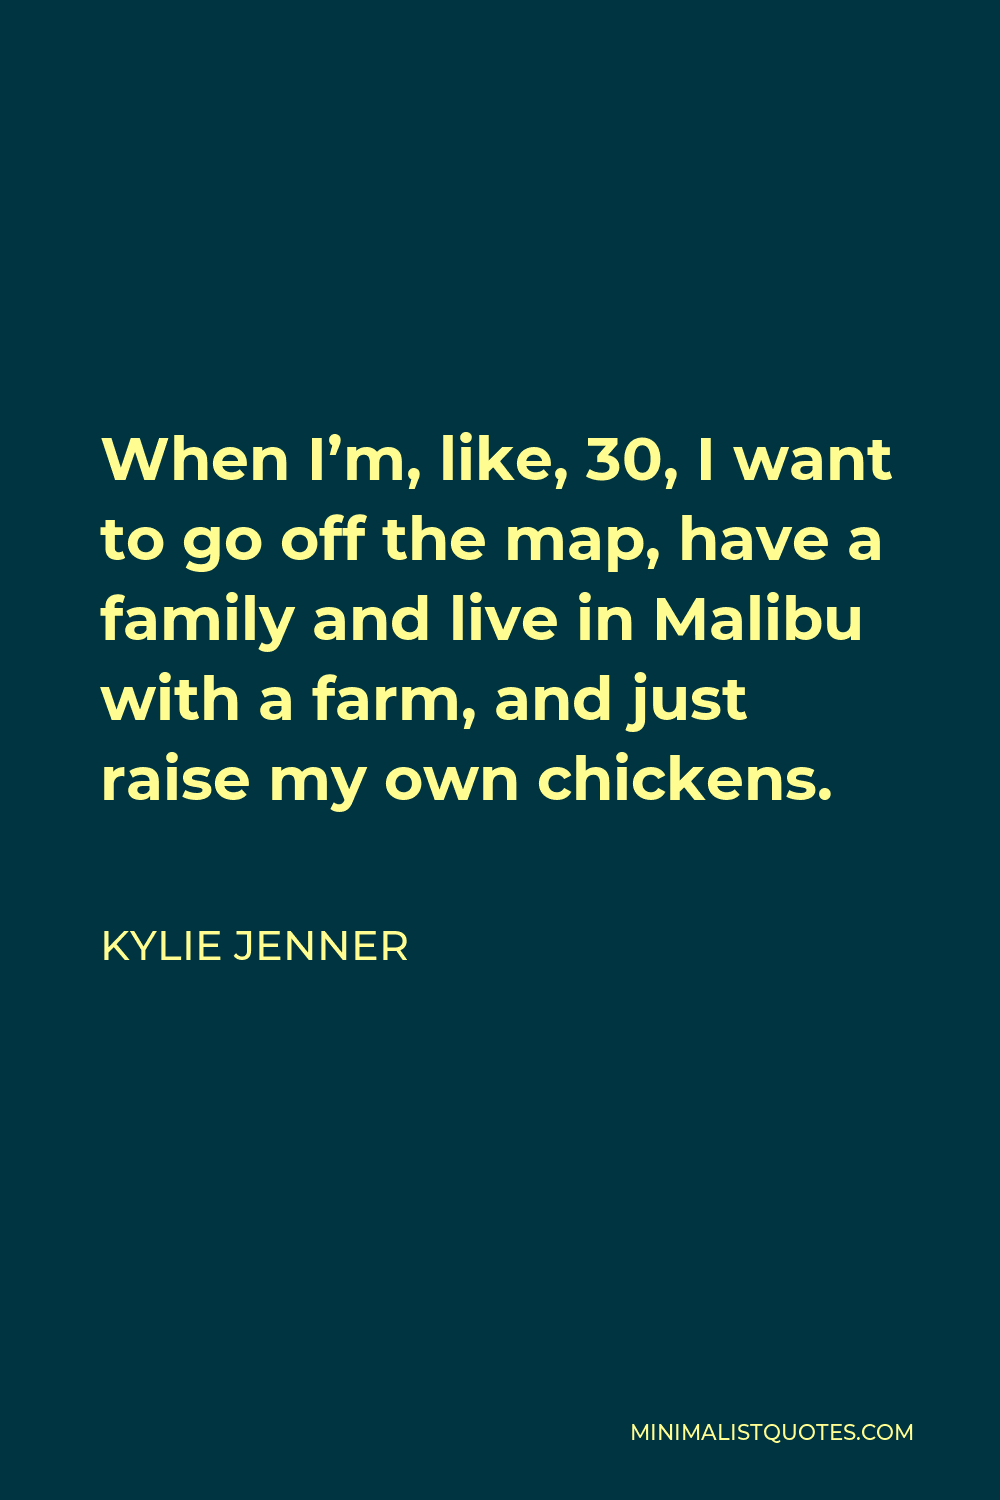 Kylie Jenner Quote - When I’m, like, 30, I want to go off the map, have a family and live in Malibu with a farm, and just raise my own chickens.